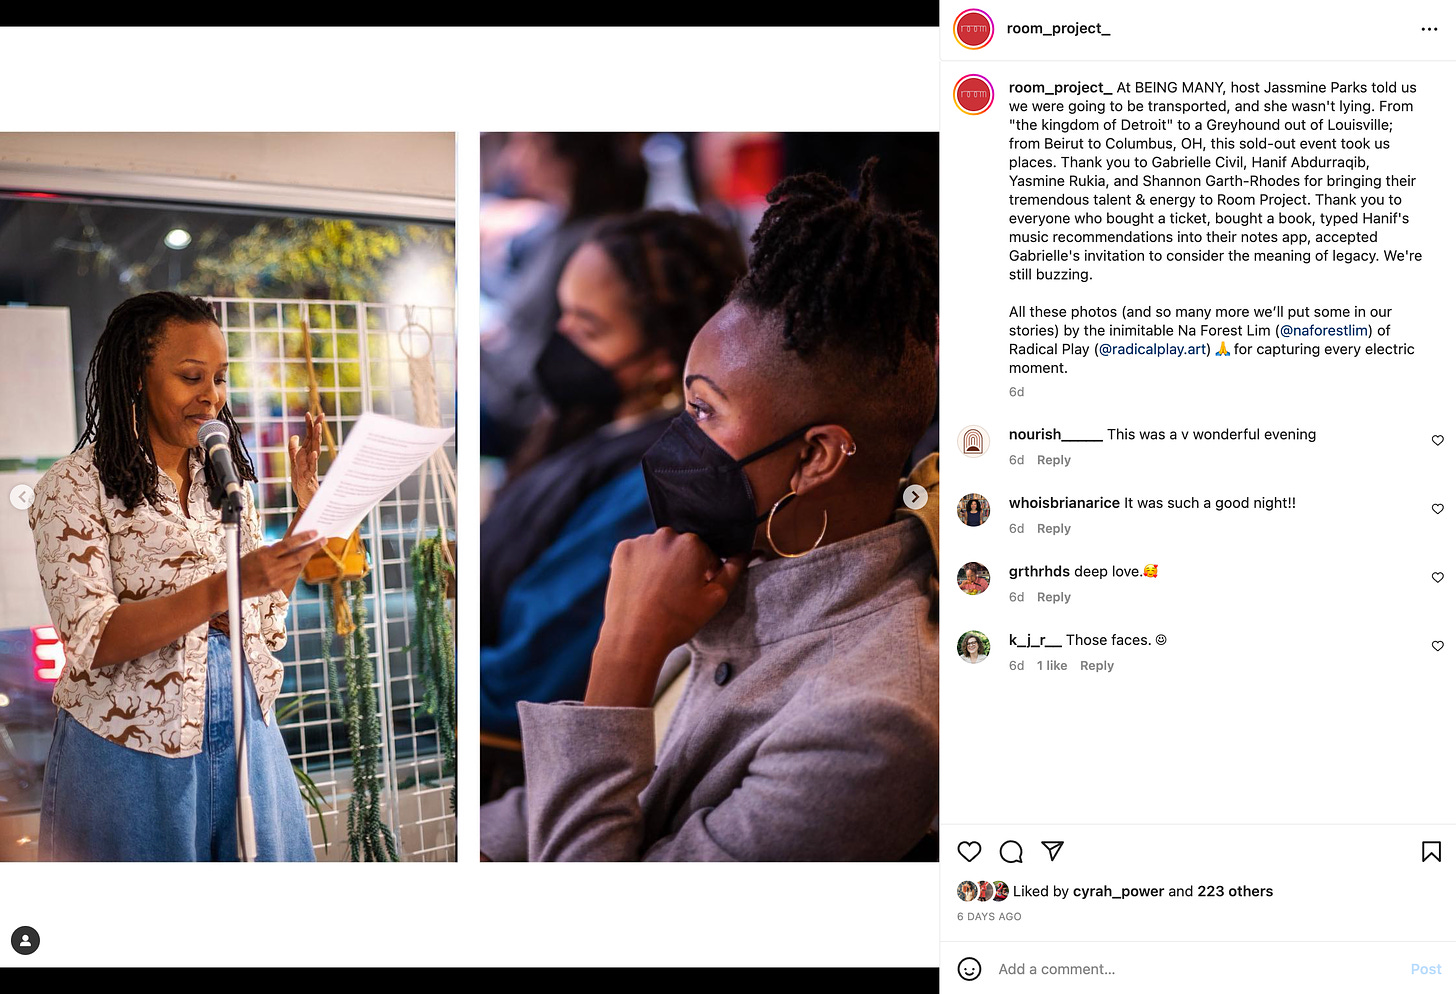 an instagram post, showing two images side by side: on the left, a brown skinned nonbinary person with shoulder length locs, wearing a white printed shirt and wide-legged jeans, reads in front of a microphone; on the right, a brown skinned woman with twists and a mask watches intently while listening to the reader